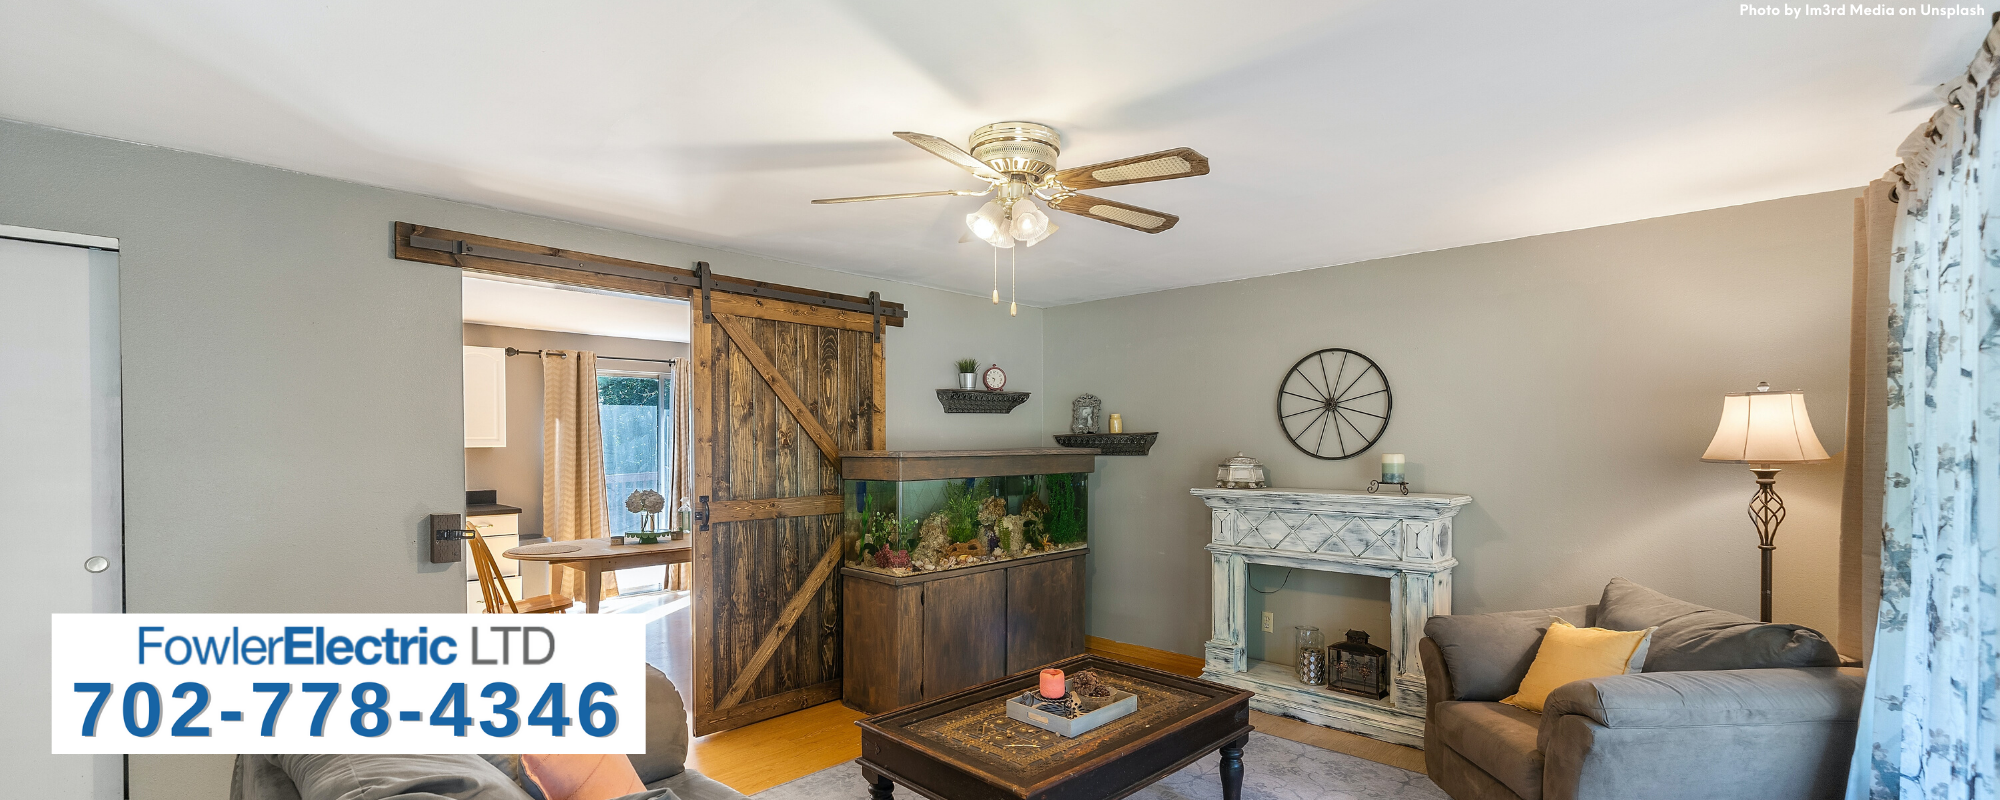 ceiling fan in room with eclectic decorations over lay says fowler electric ltd 702-778-4346